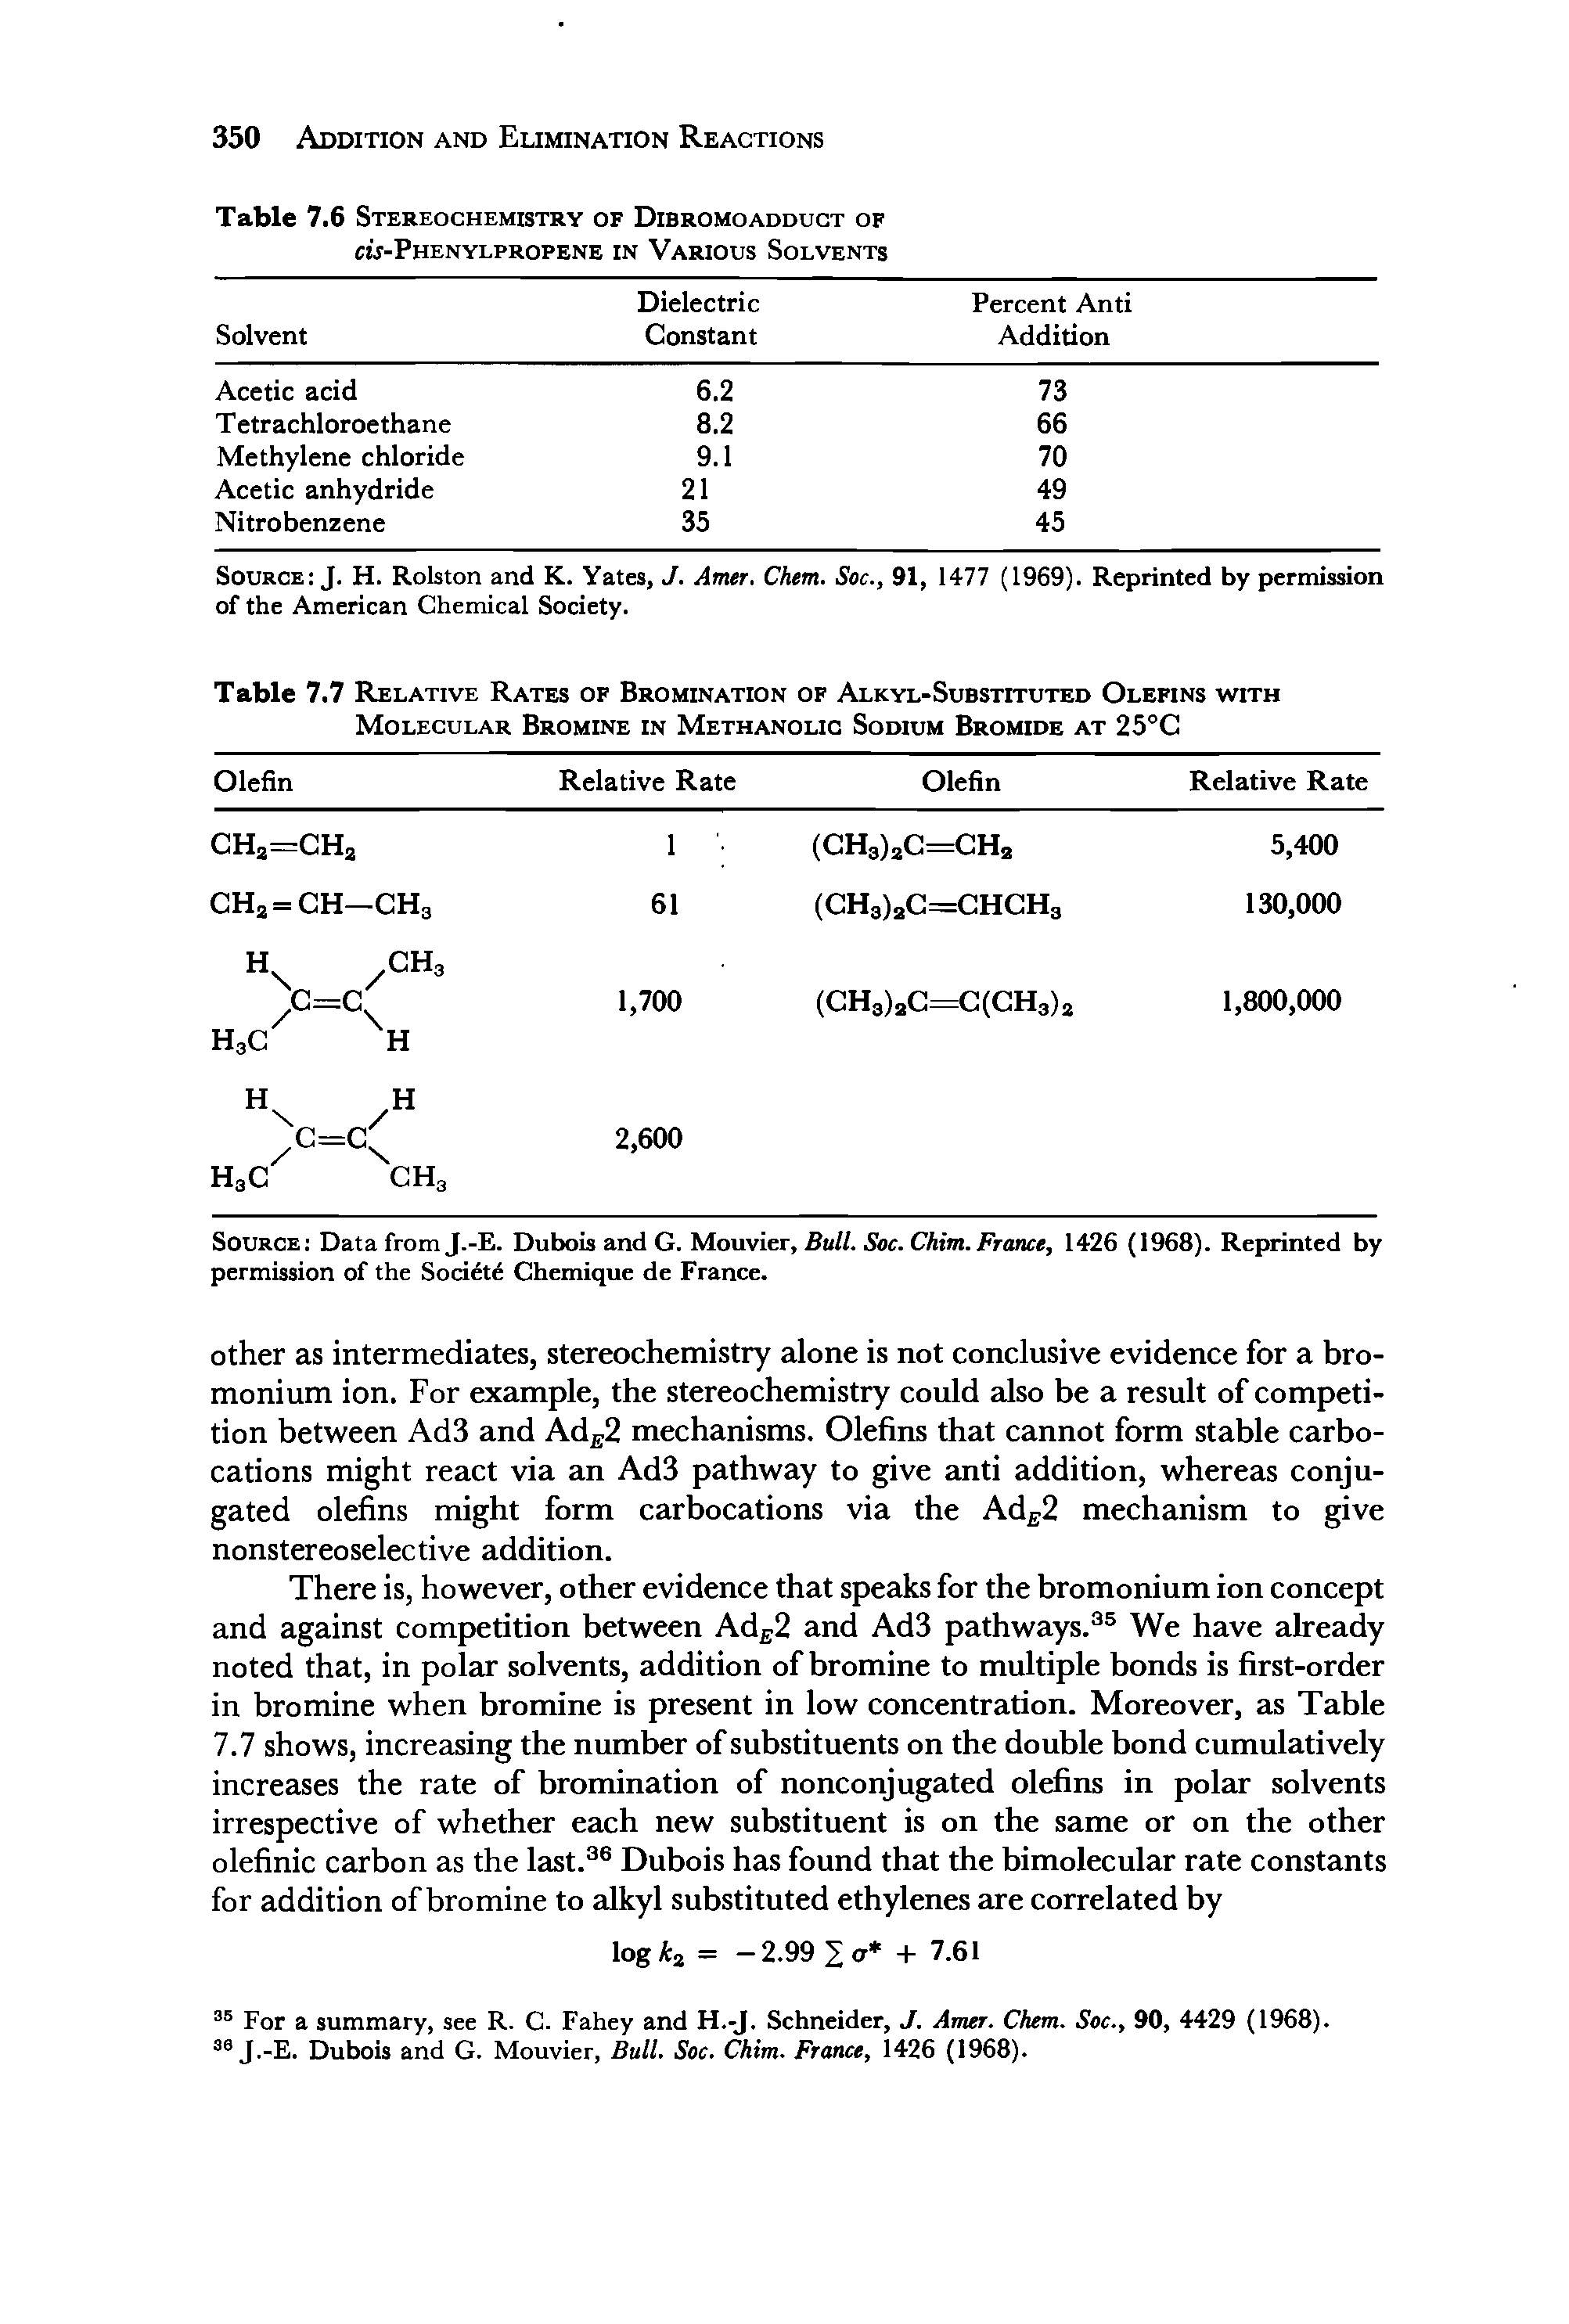 Table 7.7 Relative Rates of Bromination of Alkyl-Substituted Olefins with Molecular Bromine in Methanolic Sodium Bromide at 25°C ...